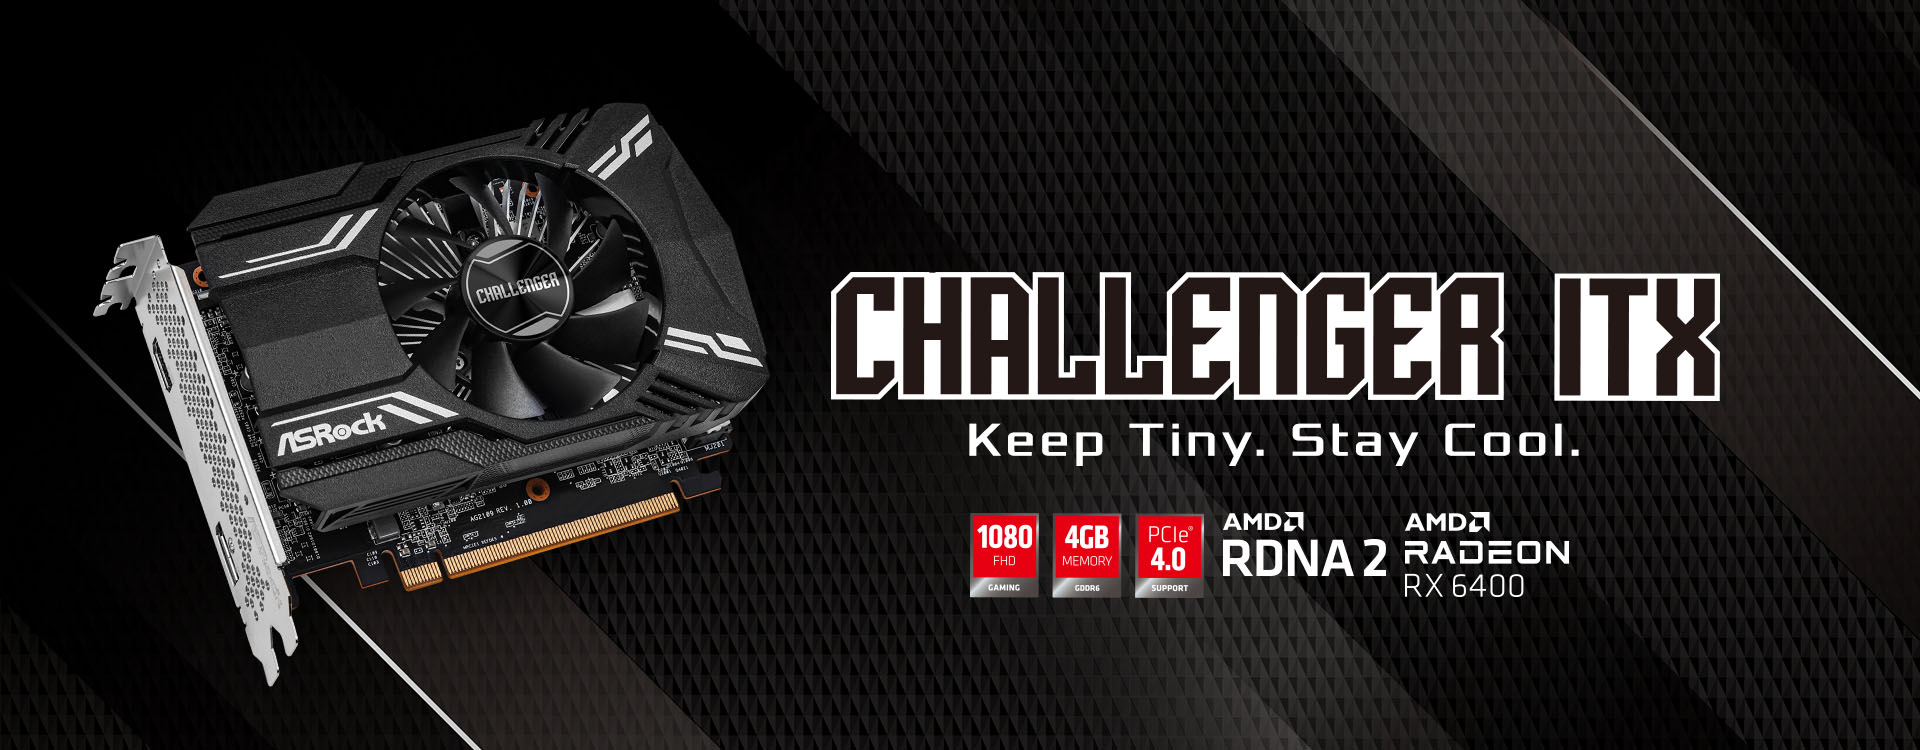 ASRock Announces AMD Radeon™ RX 6400 Challenger ITX 4GB Graphics Card
Premium Choice for Mainstream Users